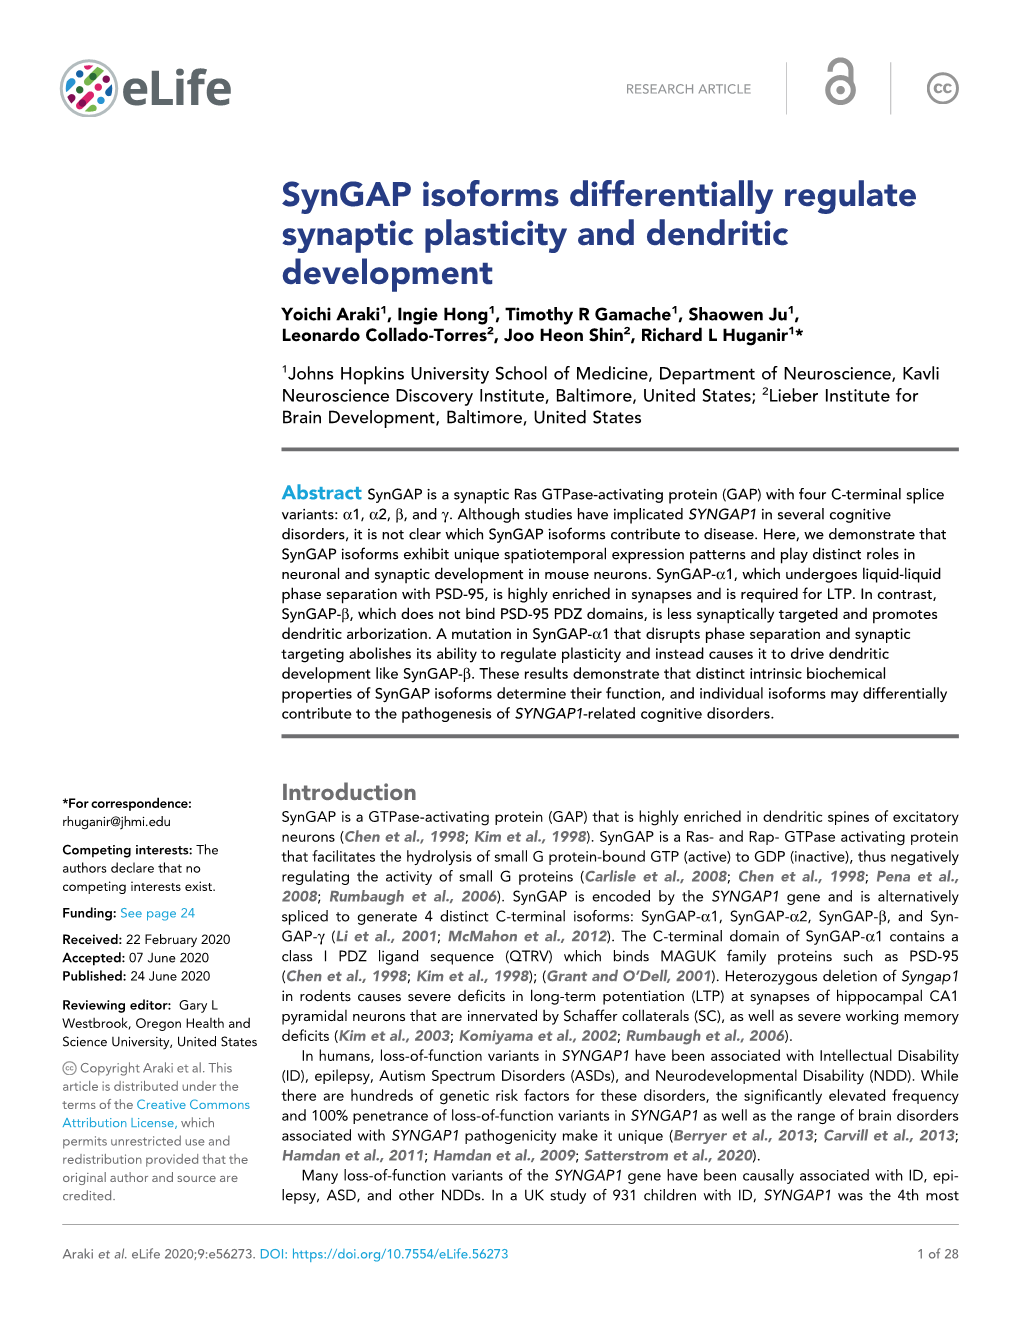 Syngap Isoforms Differentially Regulate Synaptic Plasticity And